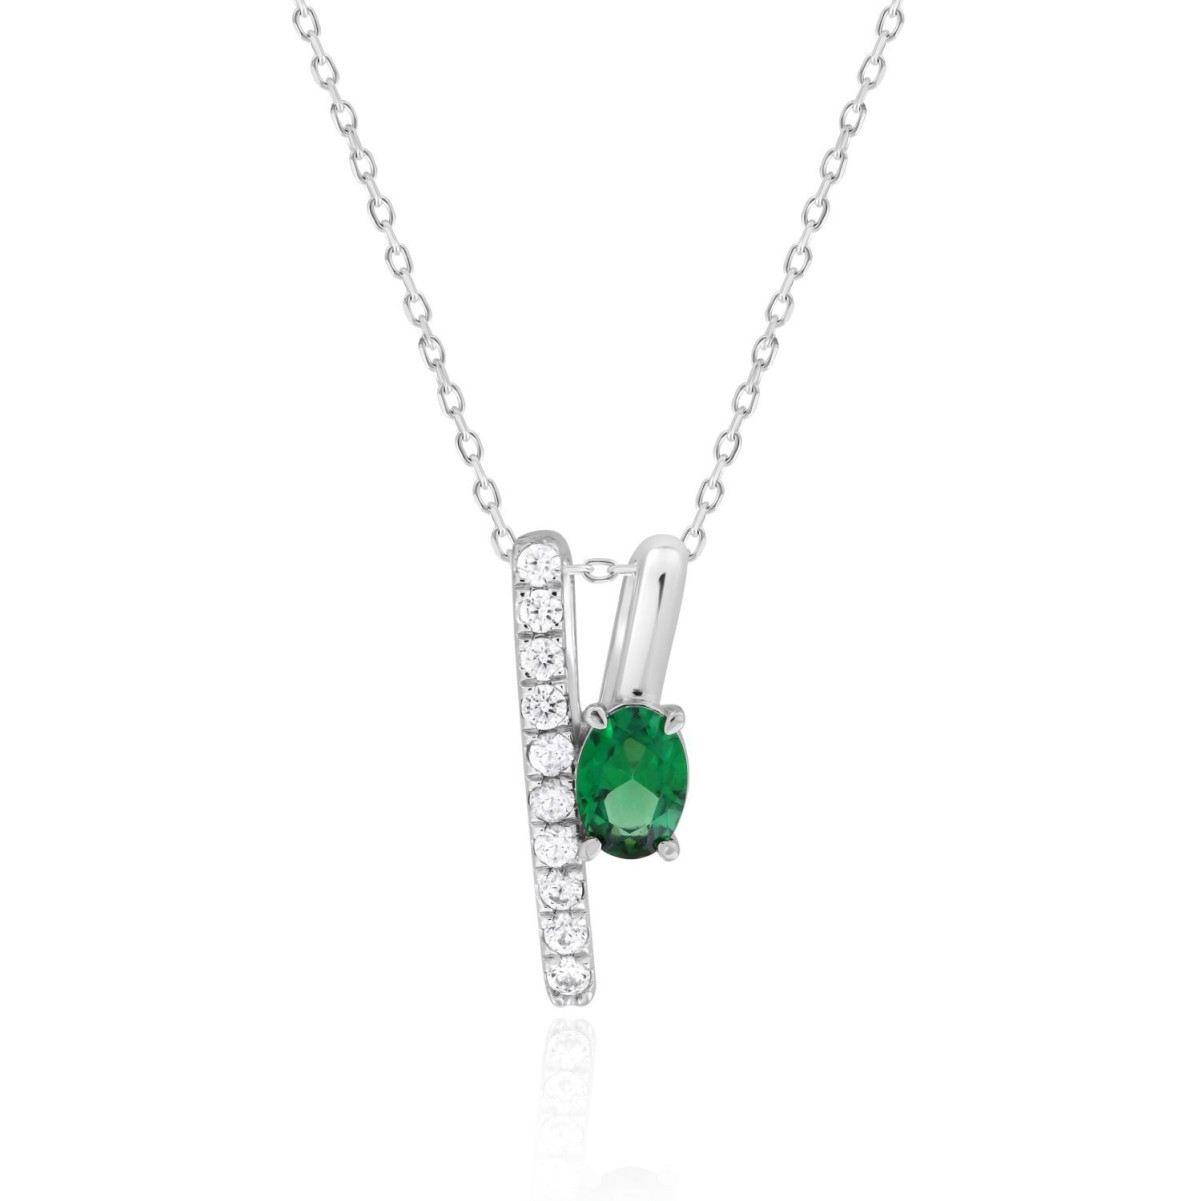 18K WHITE GOLD 1 1/5CT ROUND/OVAL DIAMOND LADIES PENDANT WITH CHAIN(COLOR STONE OVAL GREEN EMERALD DIAMOND 7/8CT)